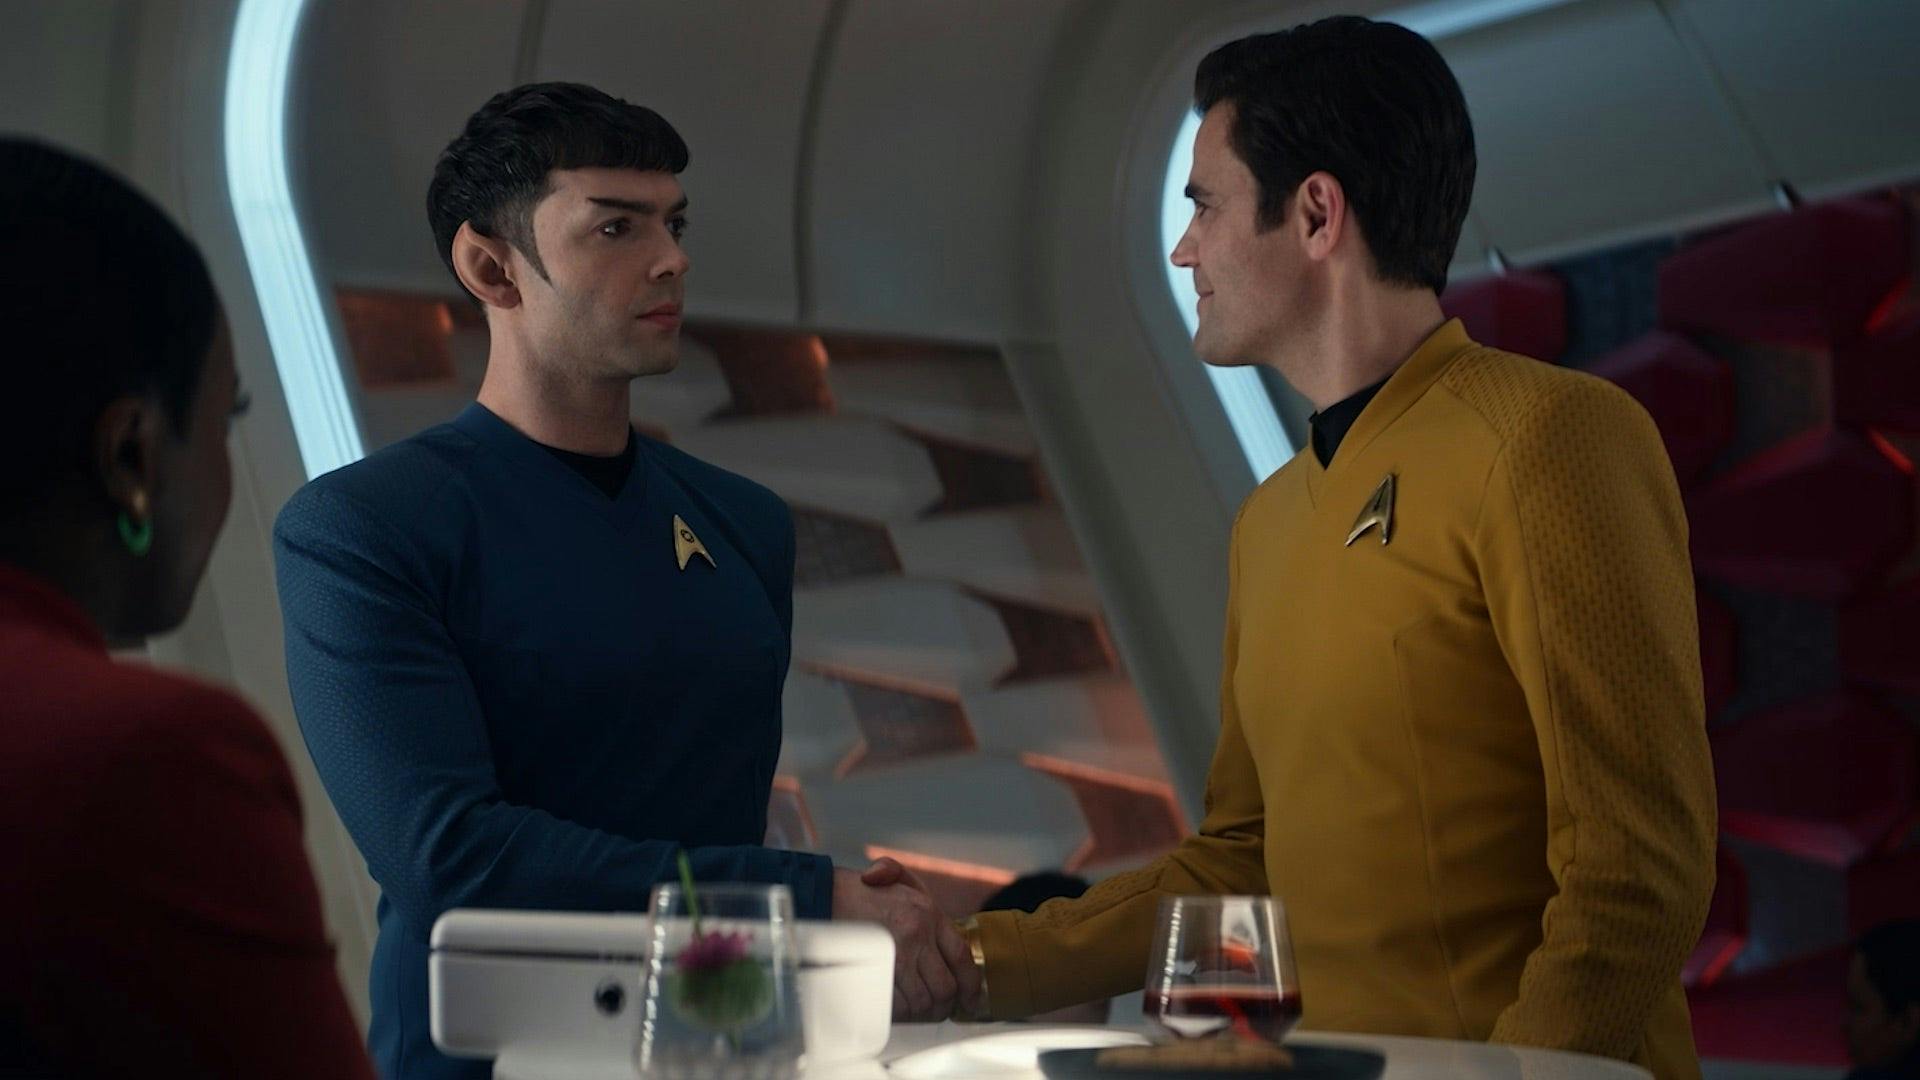 Uhura observes Spock and James T. Kirk meet each other and shake hands in the forward lounge in 'Lost in Translation'